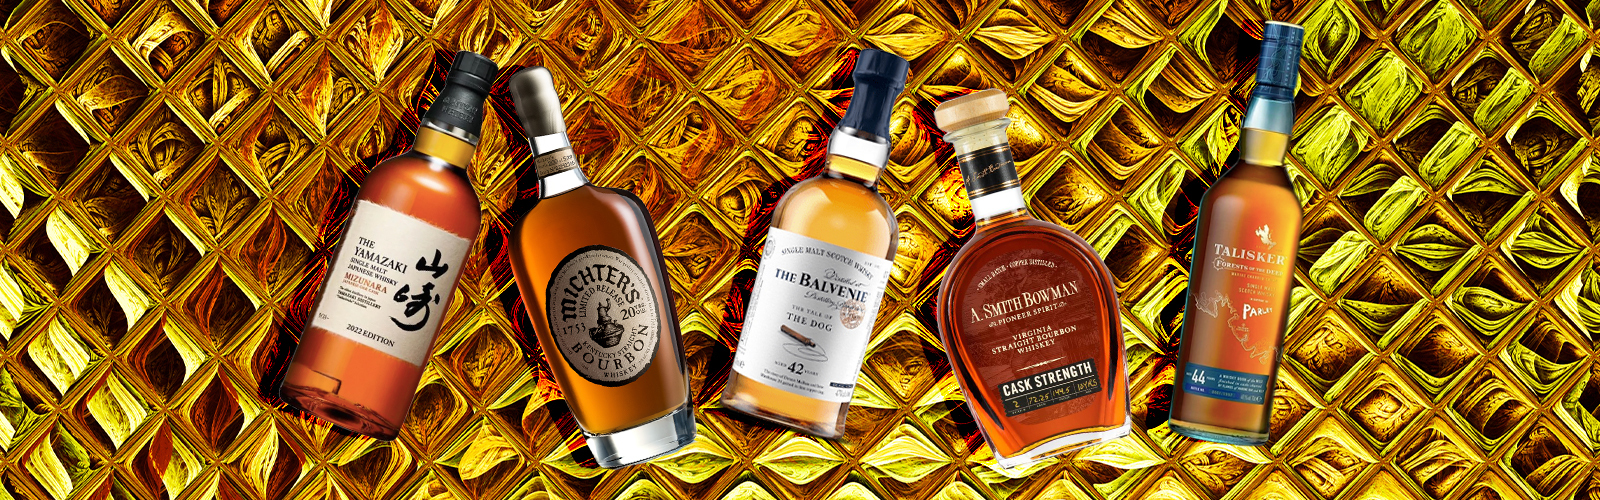 The 5 Best Whiskey Stones in 2022